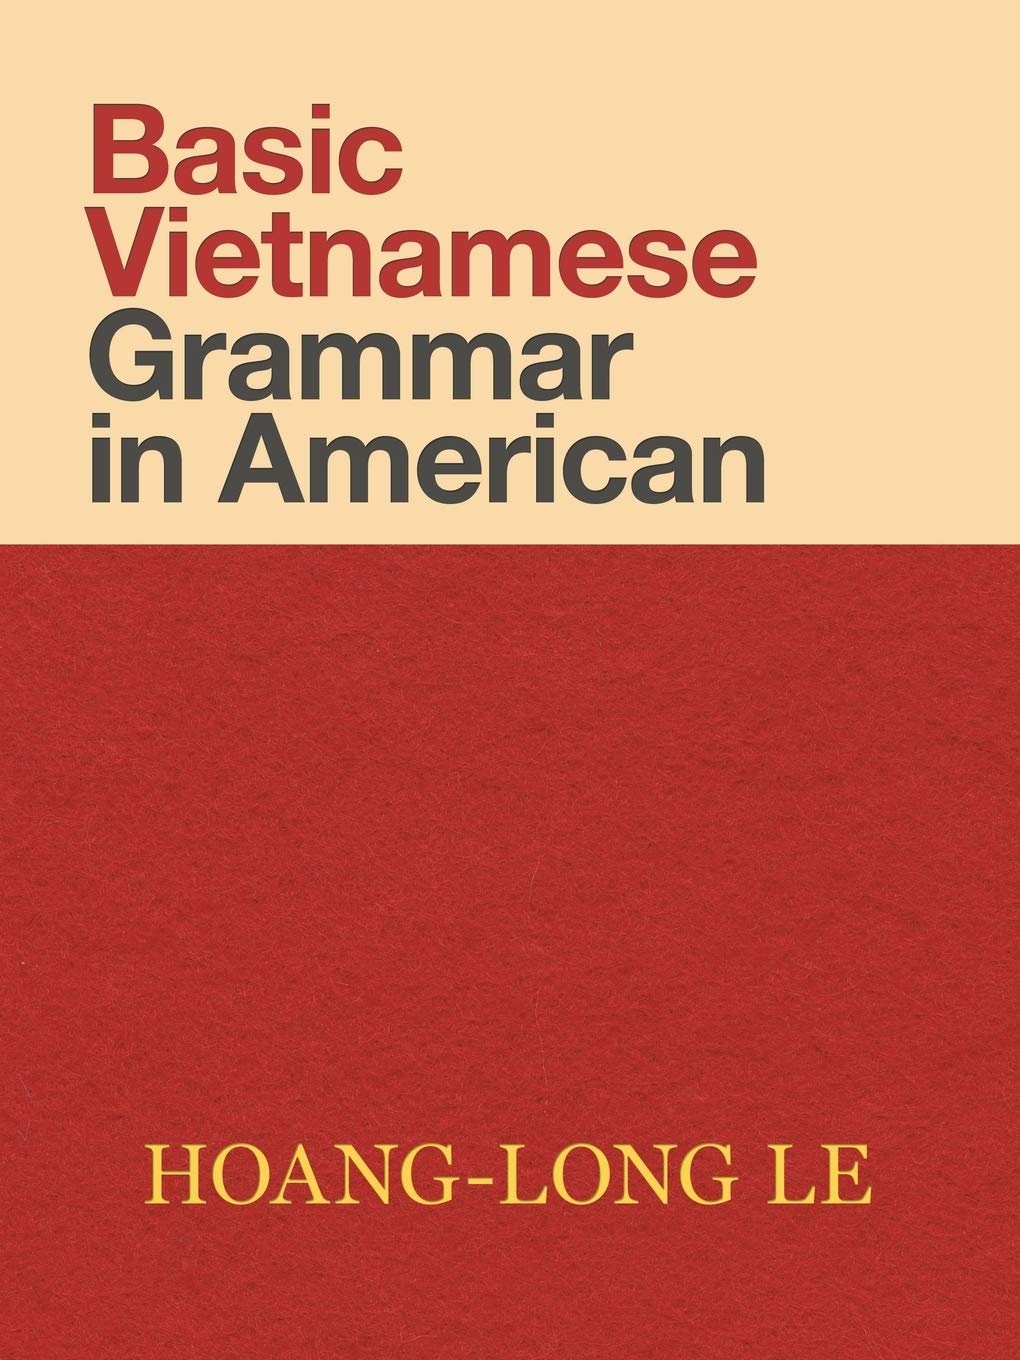 Author’s Tranquility Press, Hoang-Long Le Teaches Vietnamese In Basic Vietnamese Grammar in American 1